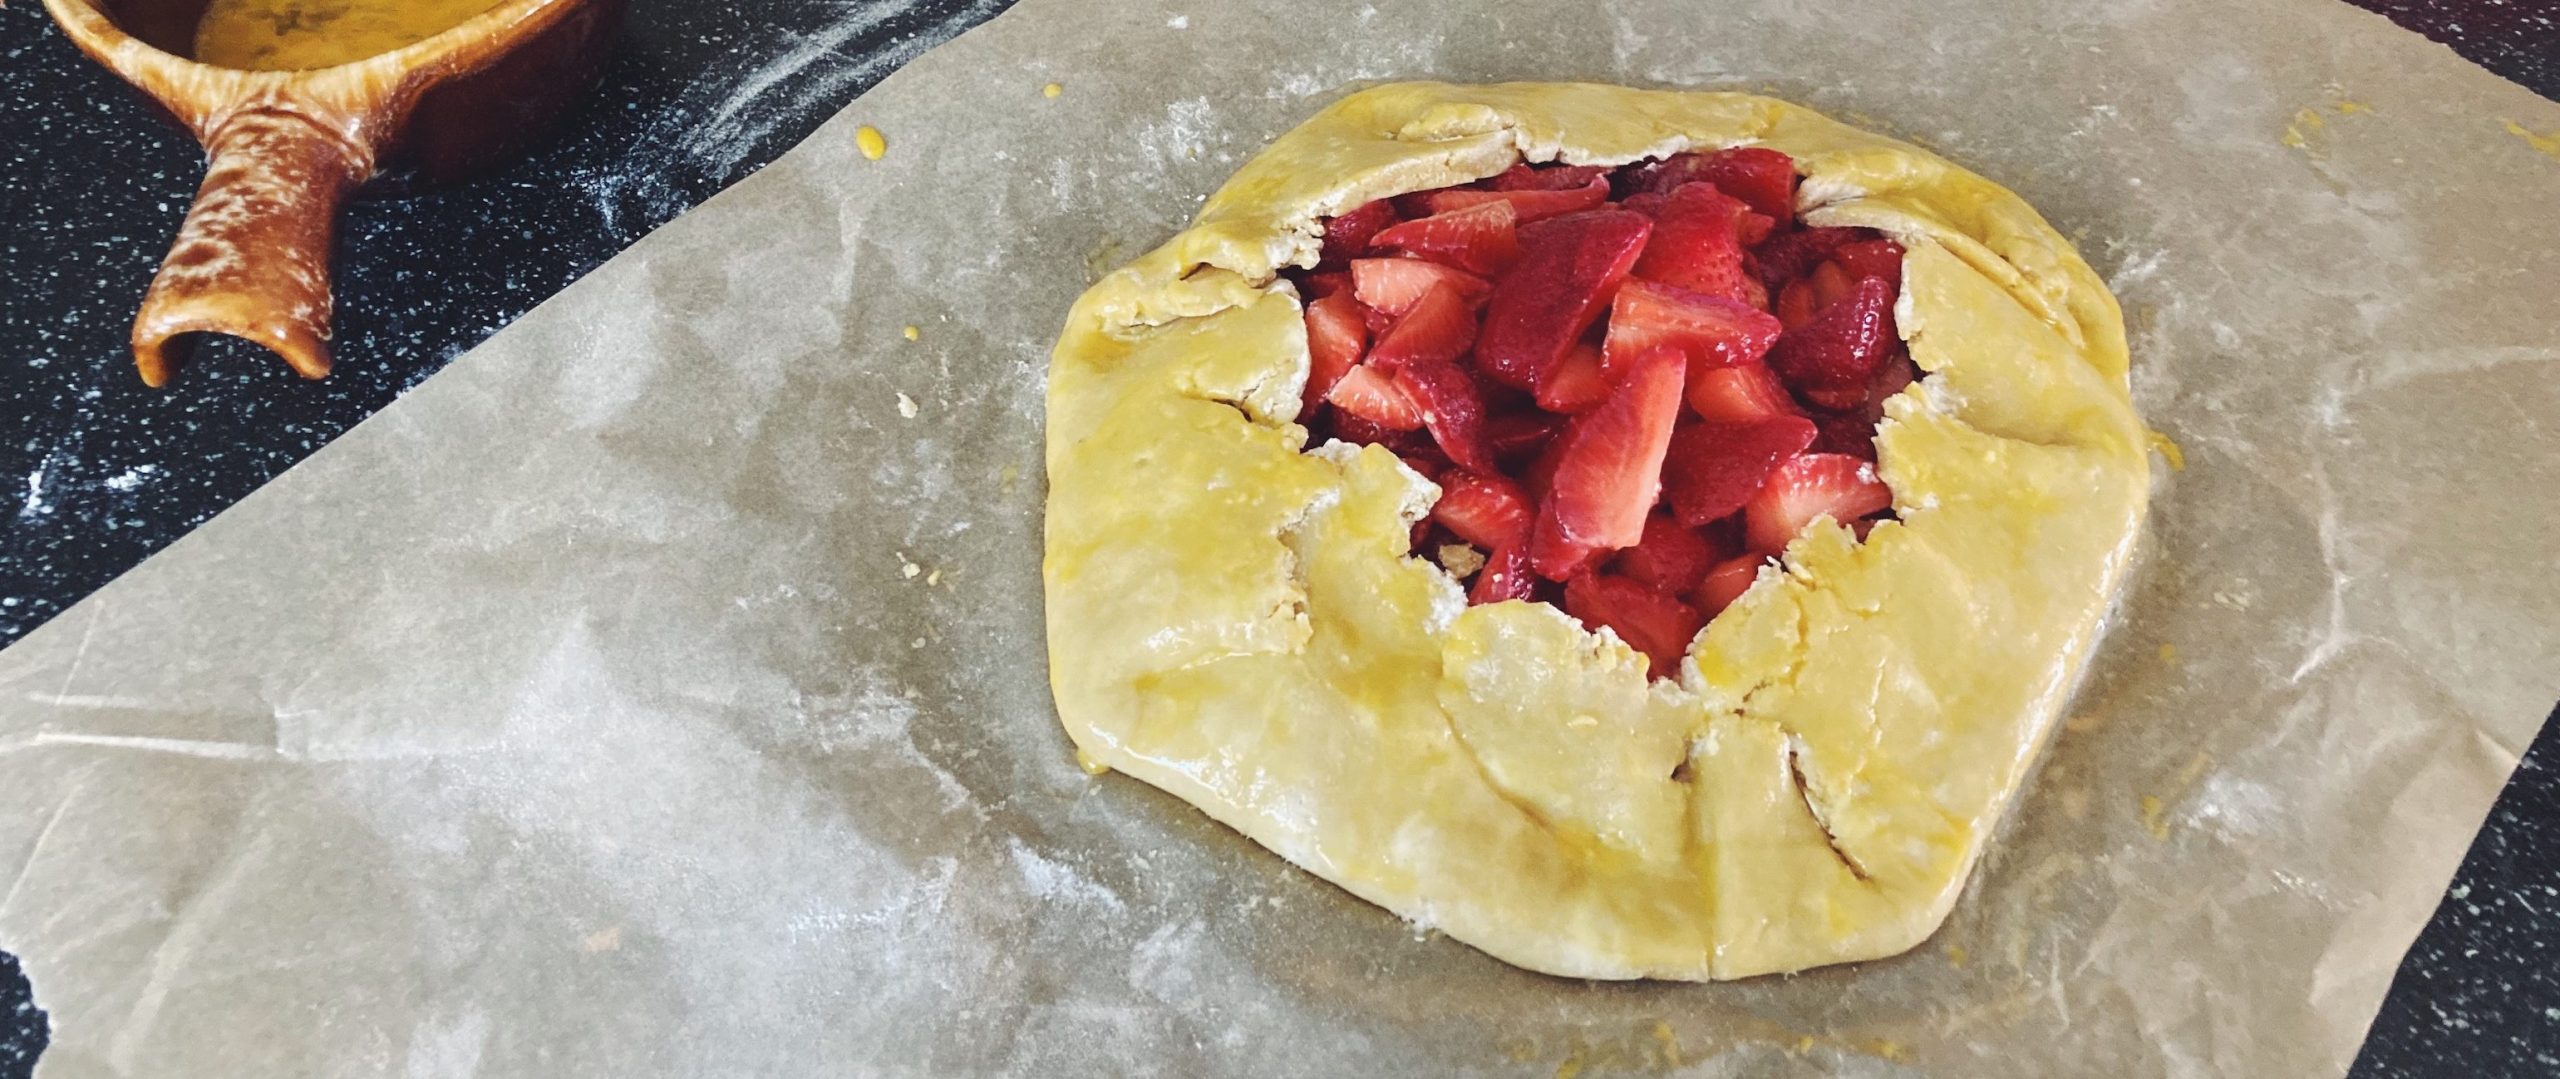 Unbaked galette with egg wash and flour next to it